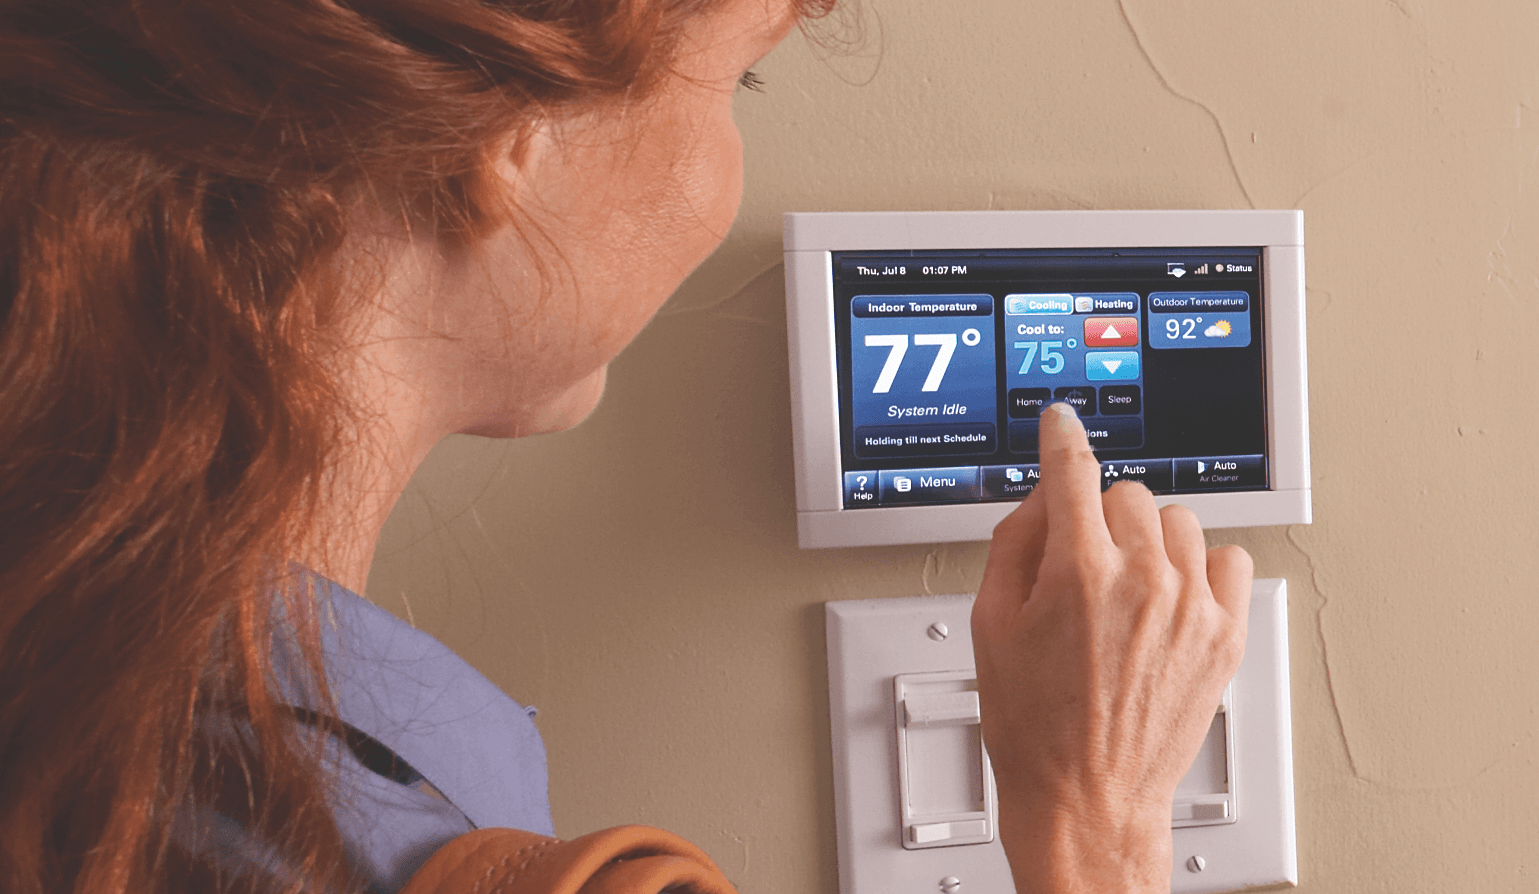 A woman changes her Trane smart thermostat from 77 degrees to 75 degrees.